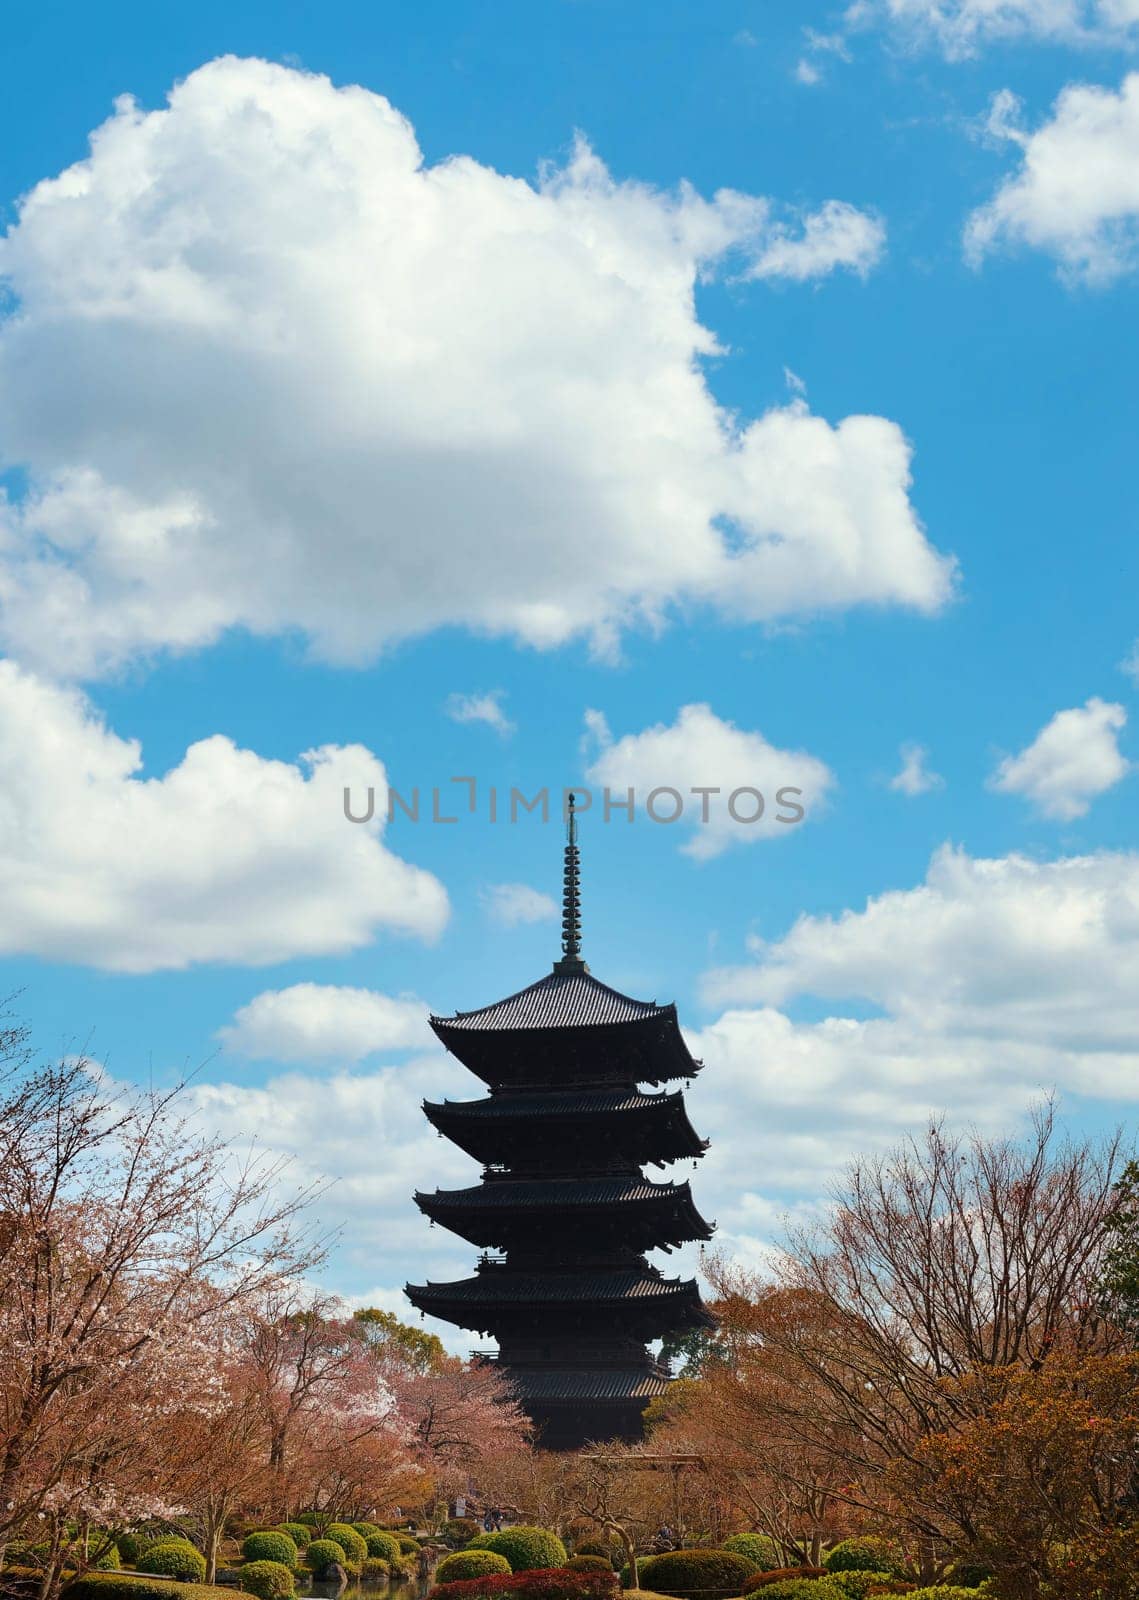 kyoto, japan - mar 25 2023: Above a lush garden filled with vibrant hydrangea shrubs and cherry trees on the verge of blossoming, the Toji Temple presents a traditional Japanese five-story pagoda.